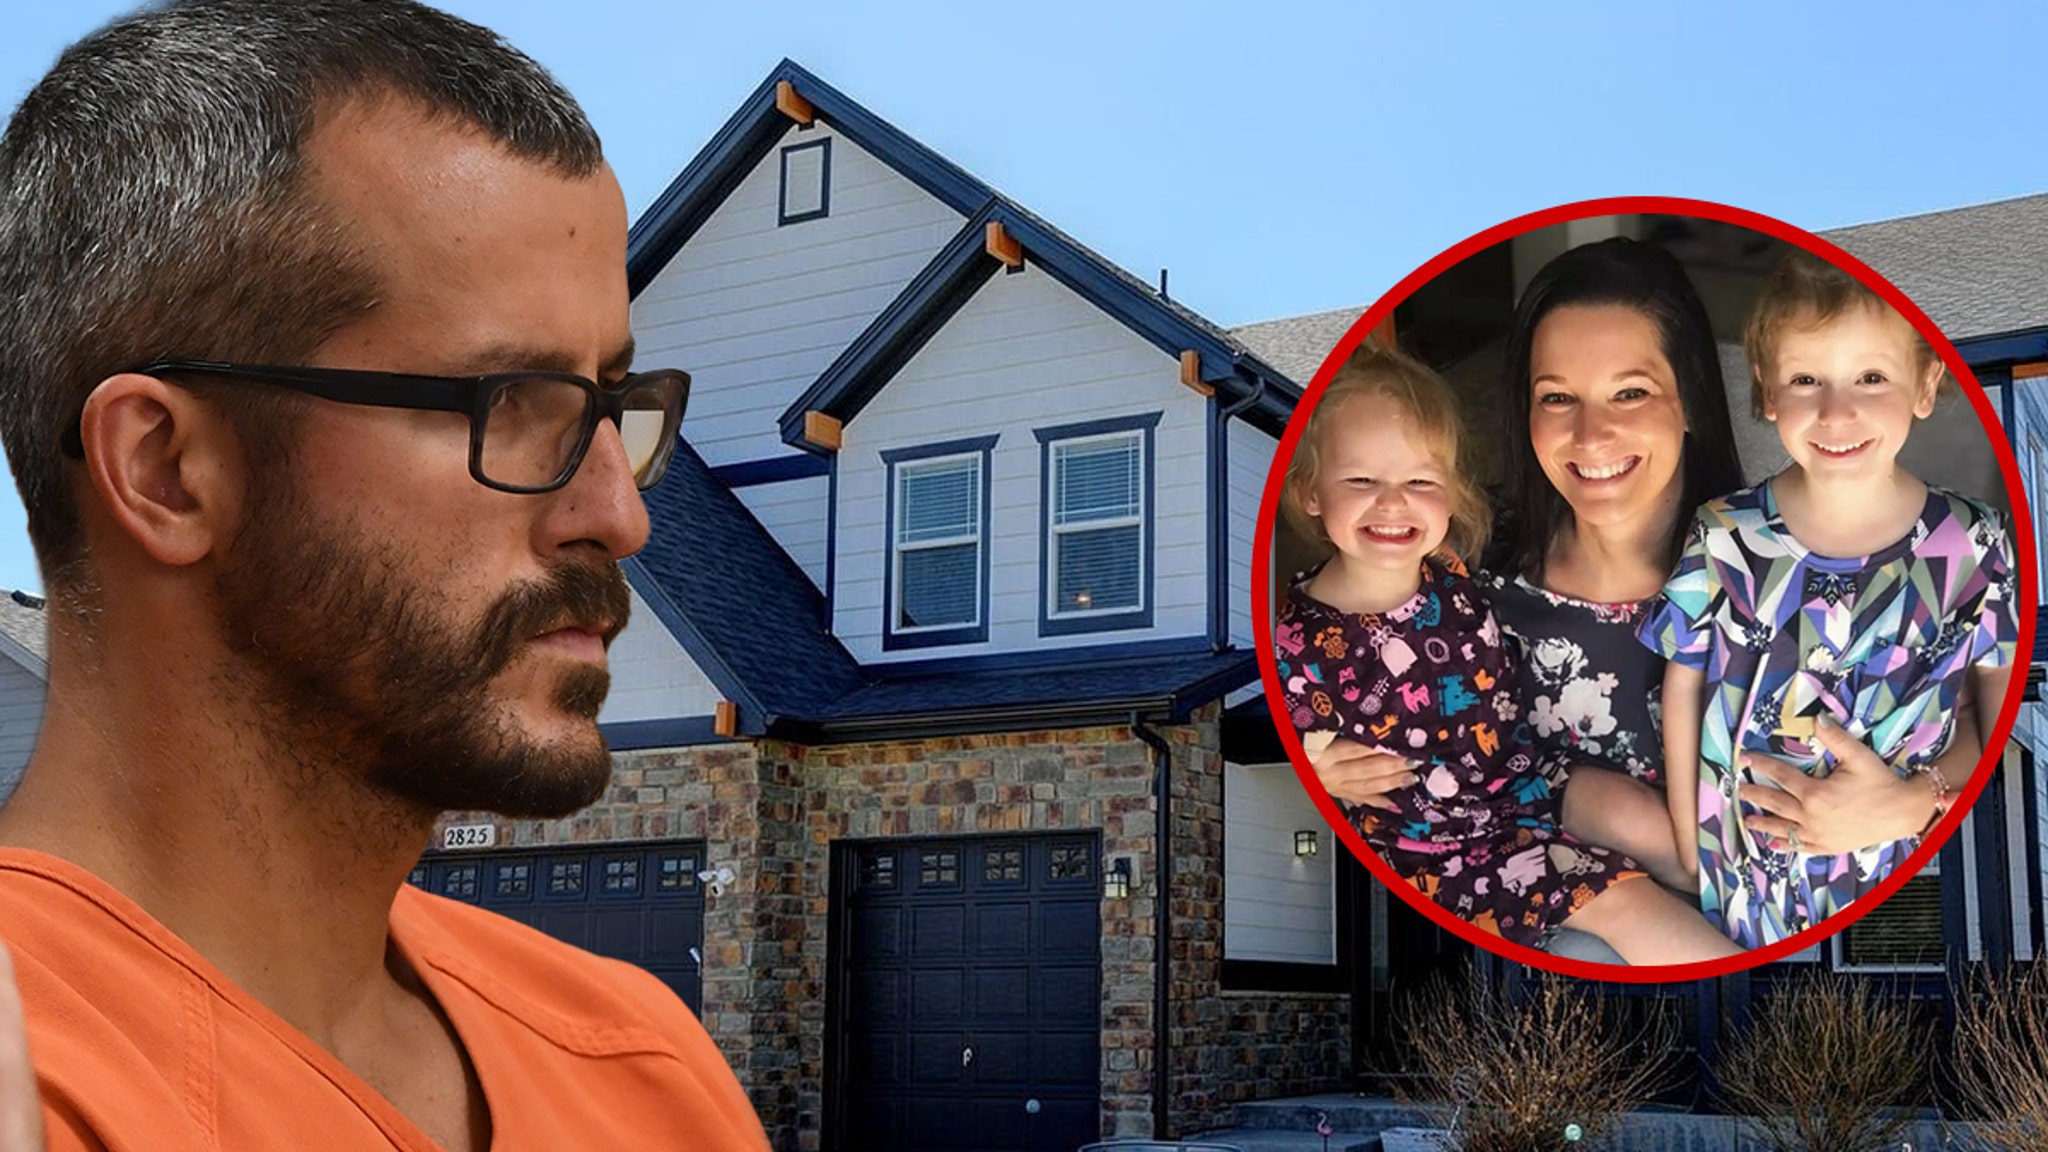 Chris Watts' Colorado home, where he killed his wife, is up for sale